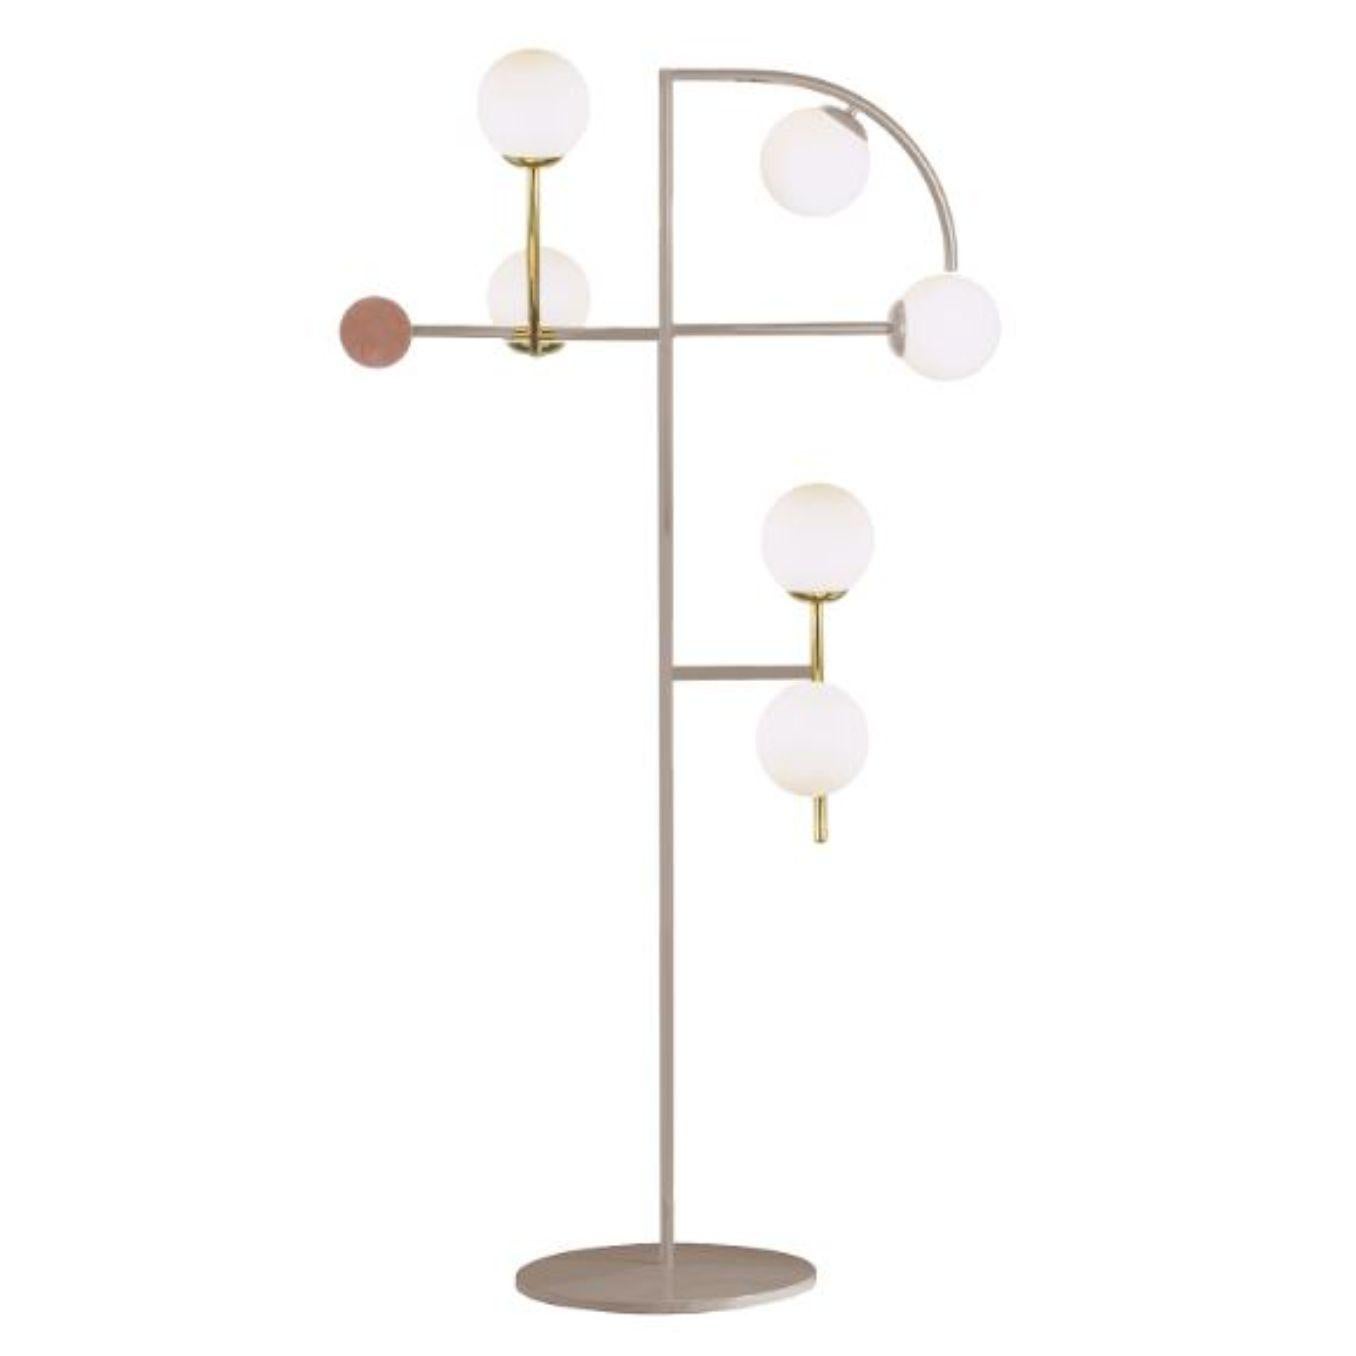 Taupe Helio floor lamp by Dooq
Dimensions: W 95 x D 30 x H 169 cm
Materials: lacquered metal, brass/nickel.
Also available in different colors and materials. 

Information:
230V/50Hz
6 x max. G9
4W LED

120V/60Hz
6 x max. G9
4W